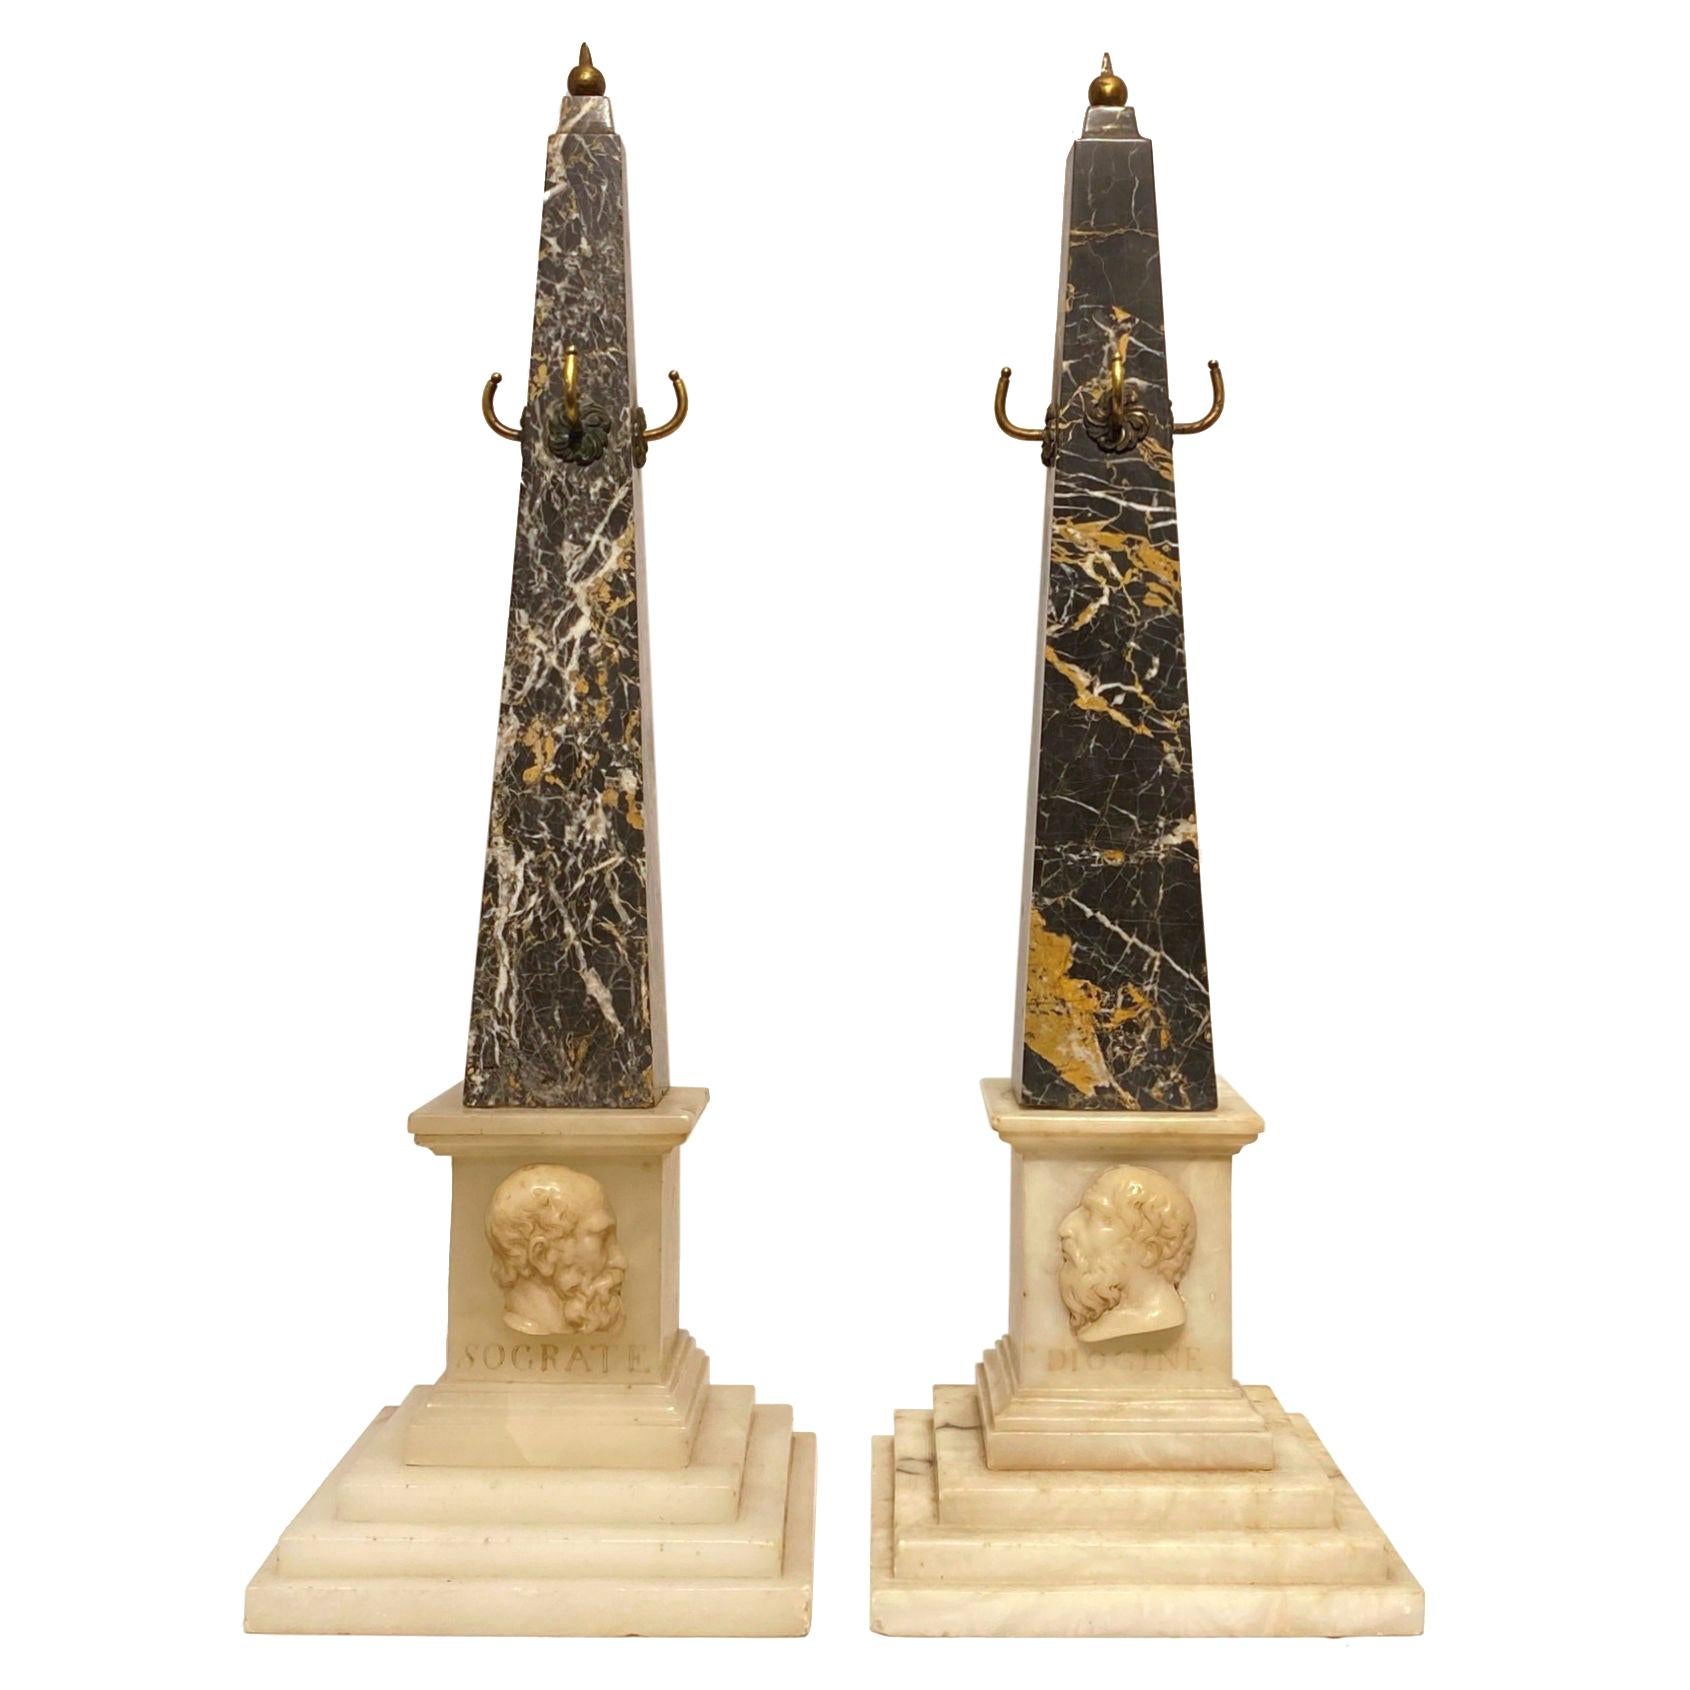 Pair of 19 Century Grand Tour Marble and Alabaster Obelisks Socrates" & "Diogine